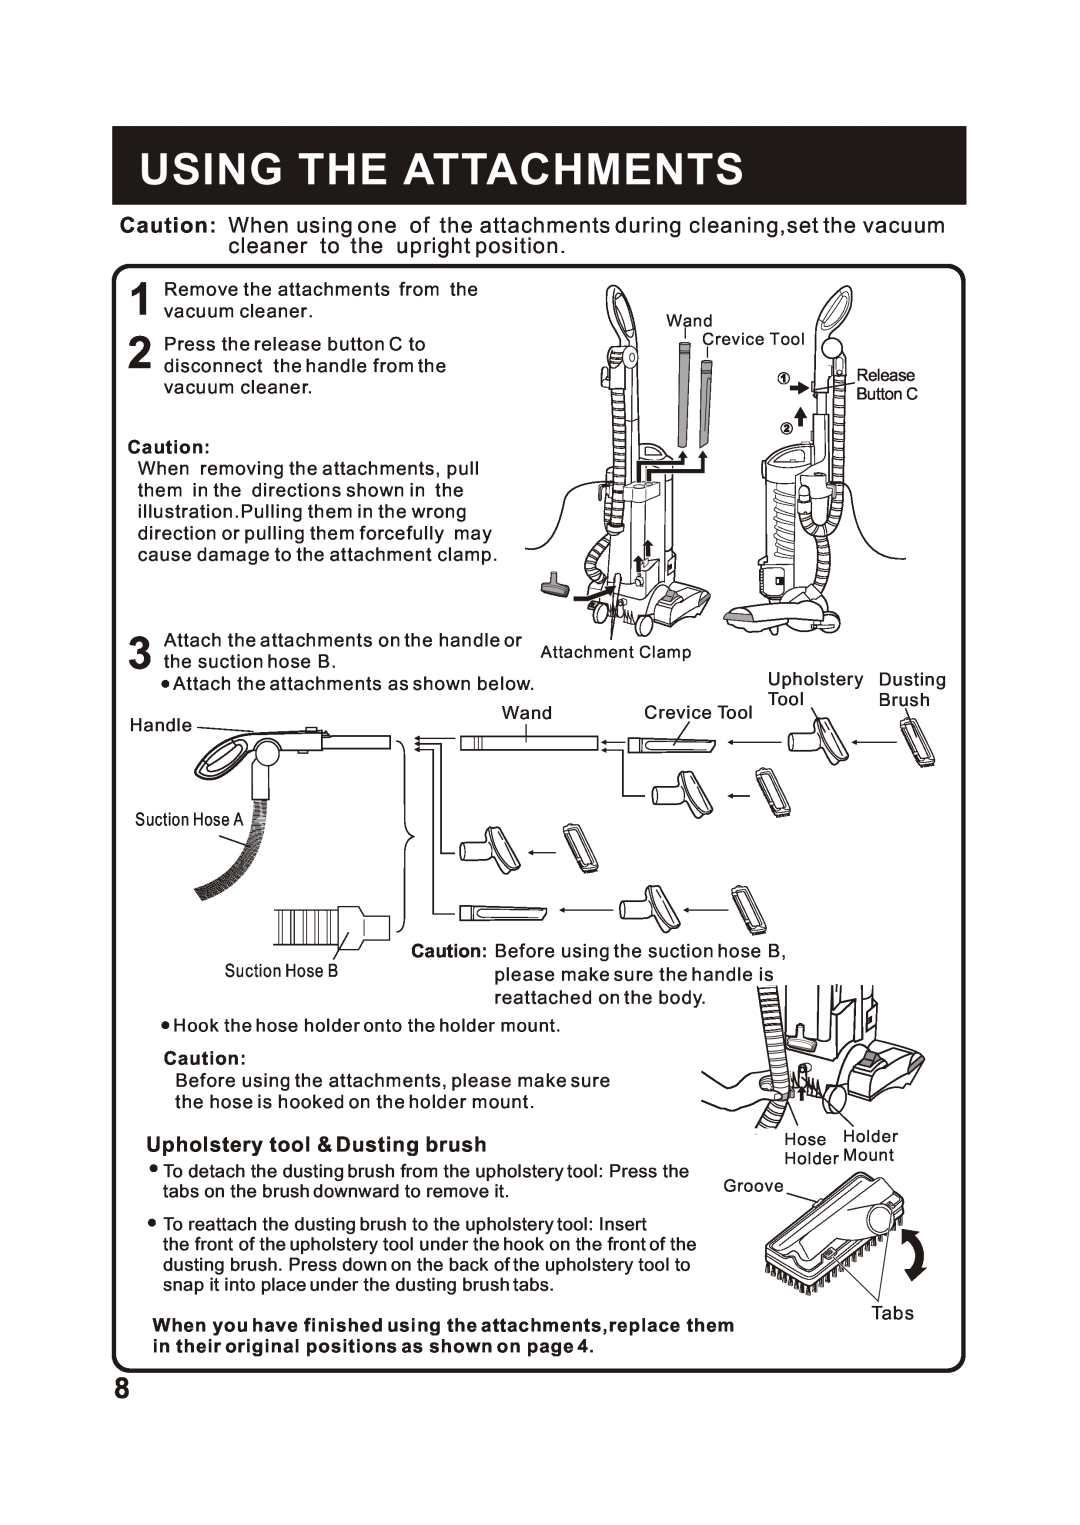 Fantom Vacuum FM741C instruction manual Using The Attachments, Upholstery tool & Dusting brush 